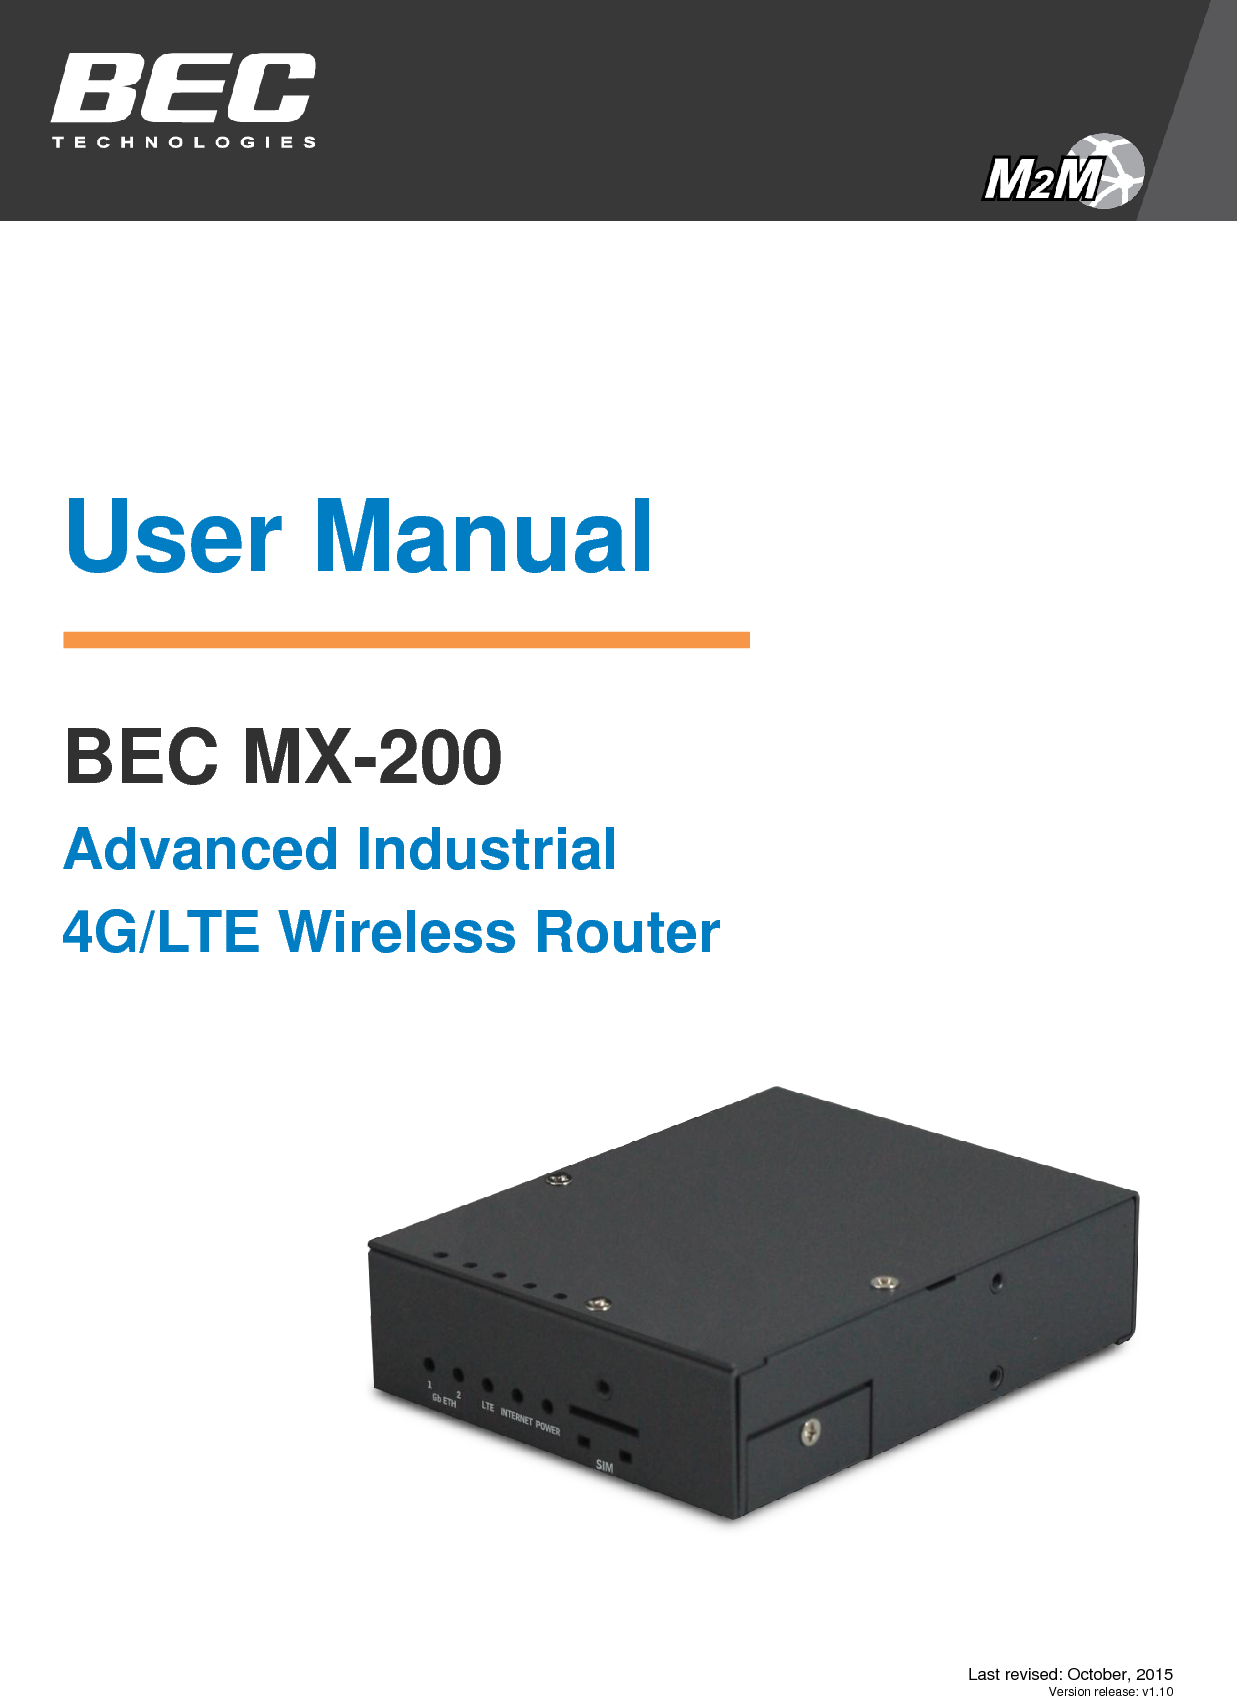  Last revised: October, 2015 Version release: v1.10         User Manual  BEC MX-200 Advanced Industrial  4G/LTE Wireless Router              